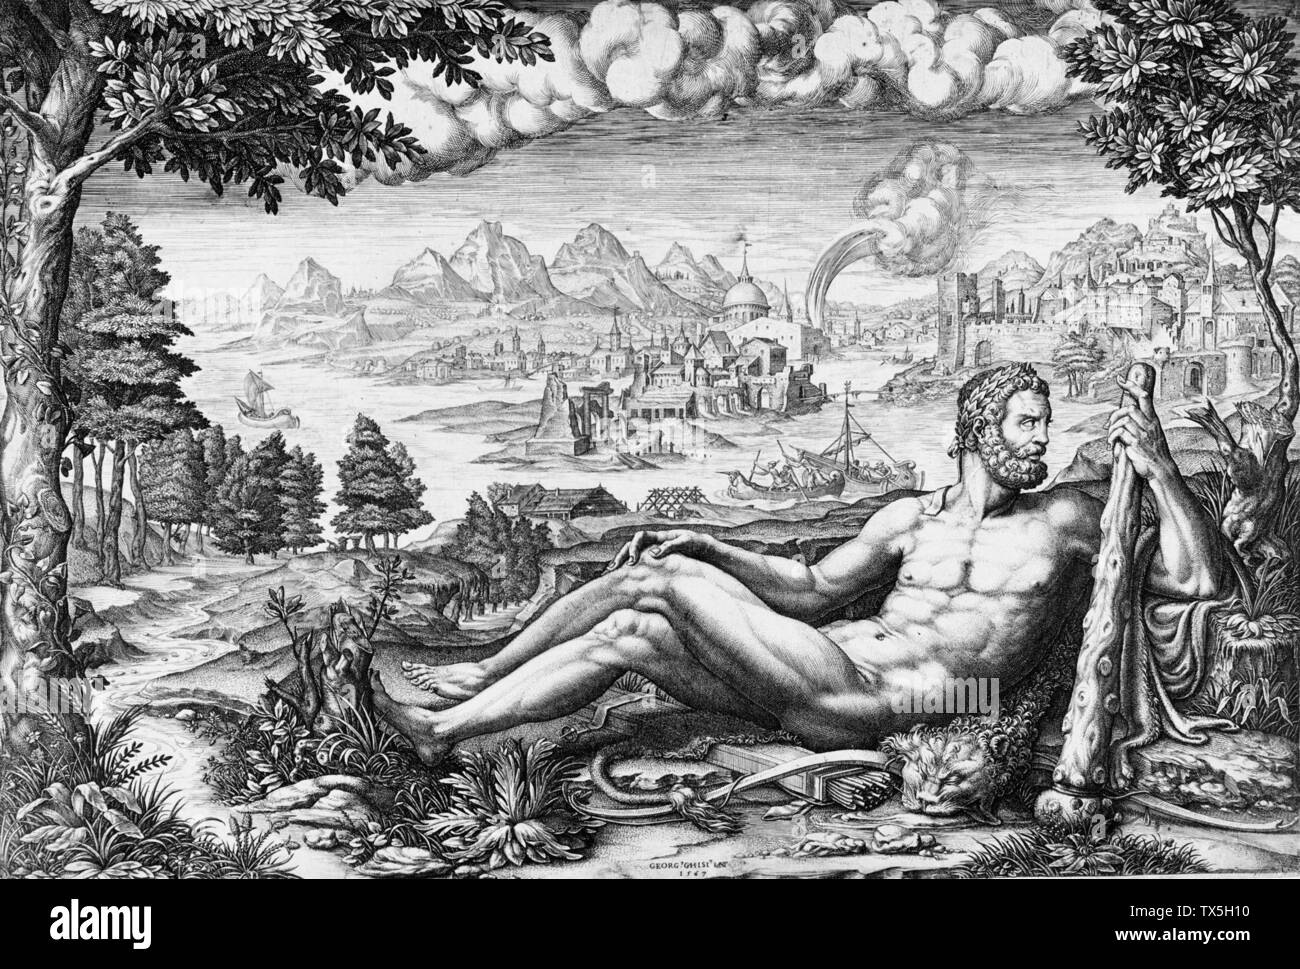 Hercules Resting from His Labors;  Italy, 1567 Prints; engravings Engraving Mary Stansbury Ruiz Bequest (M.88.91.28) Prints and Drawings; 1567date QS:P571,+1567-00-00T00:00:00Z/9; Stock Photo